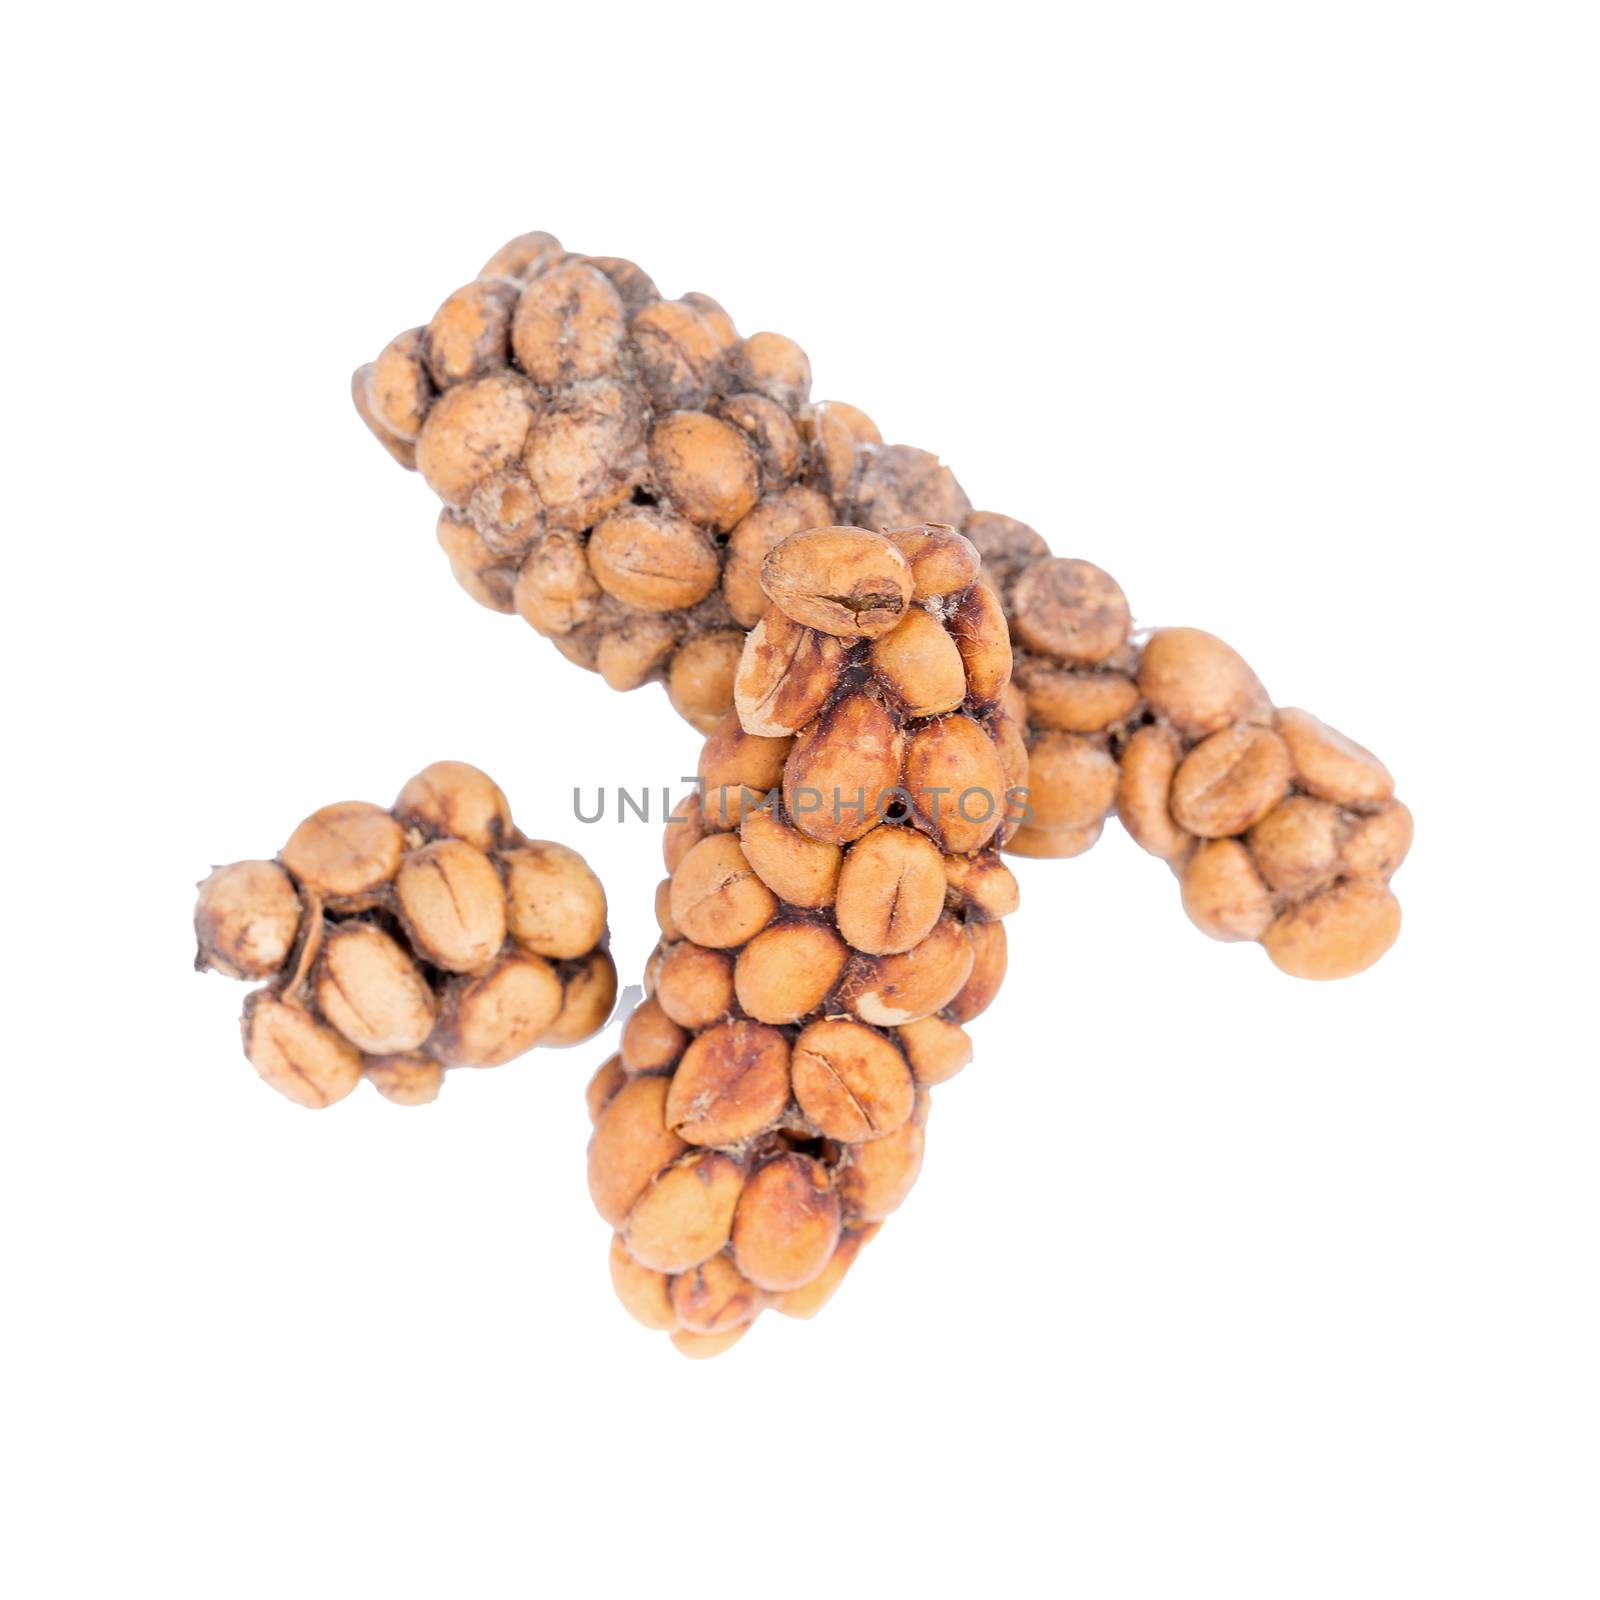 Kopi luwak or civet coffee, Coffee beans excreted by the civet isolated on white background.